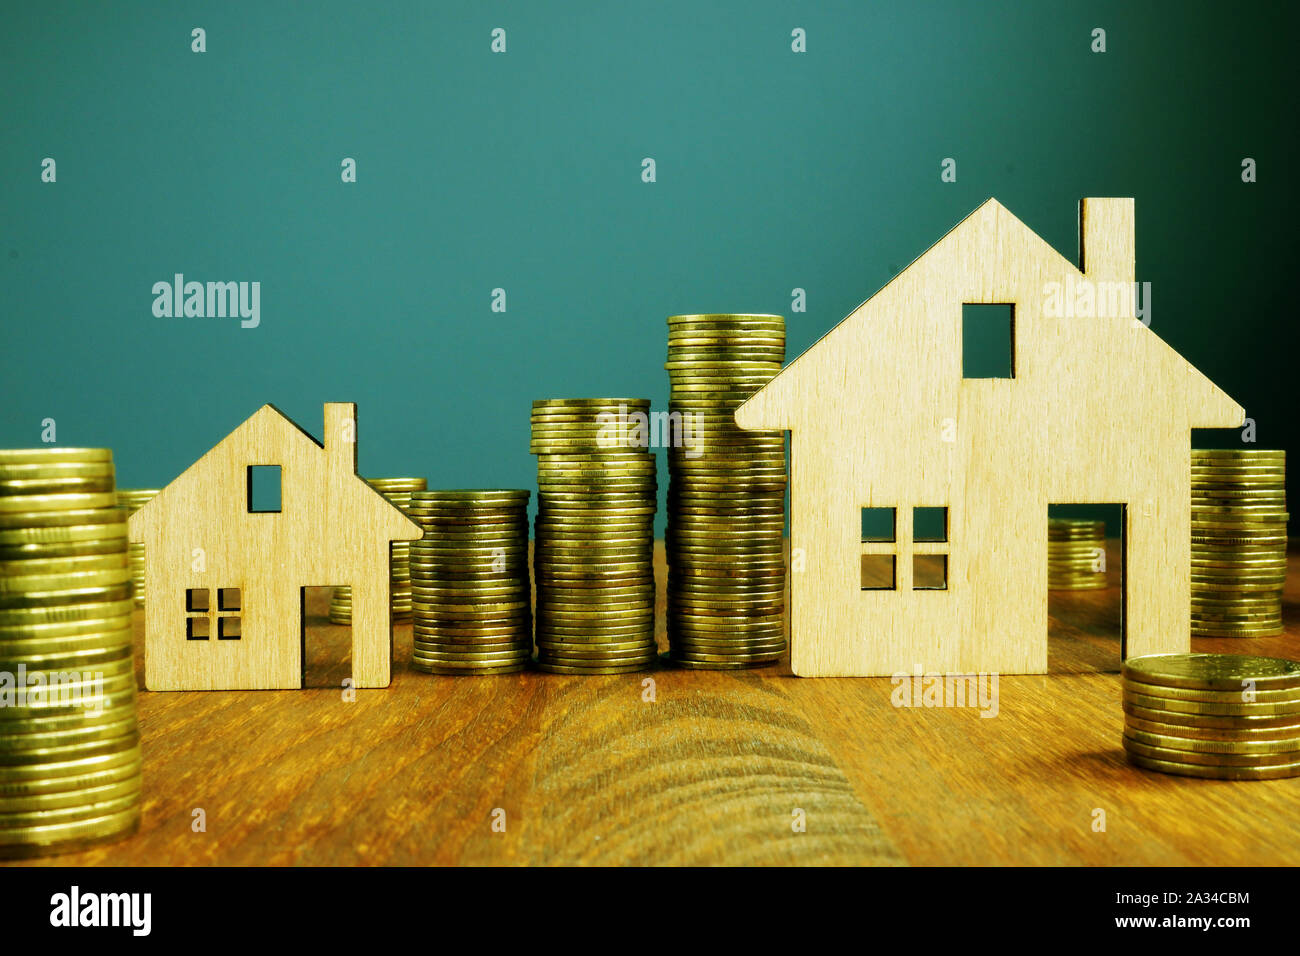 Investment Property concept. Wooden homes and increasing columns of money. Stock Photo